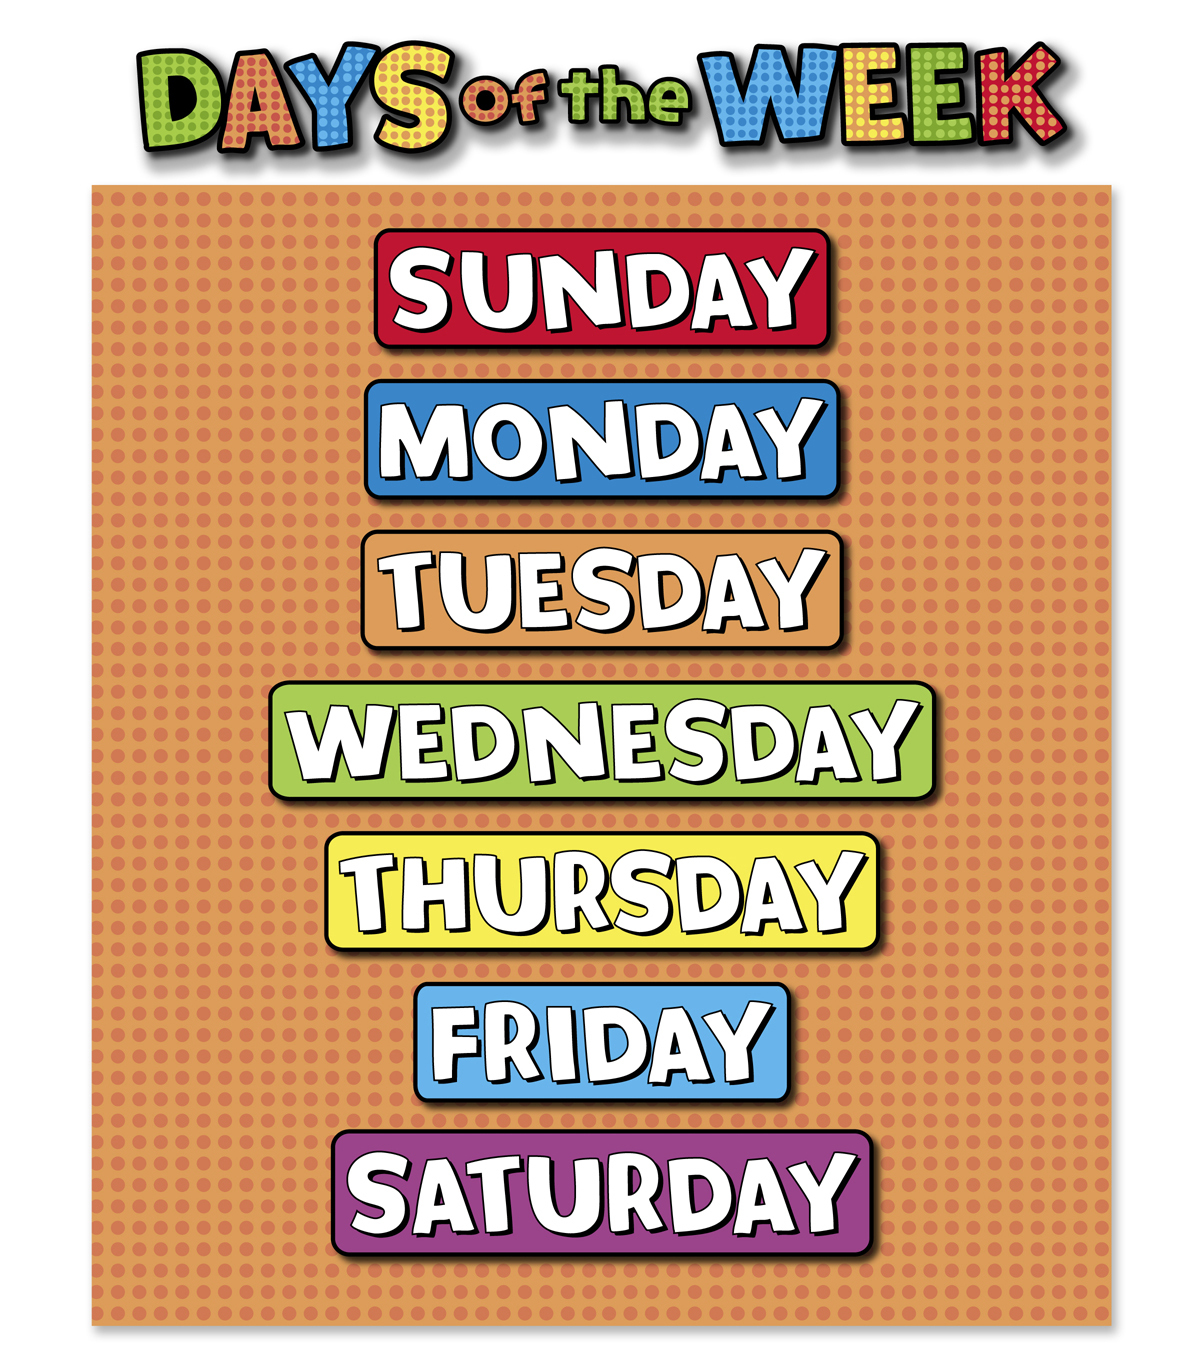 Days of the week for kids song. Days of the week. Карточки на тему Days of the week. Days of the week плакат. Days of the week картинки.